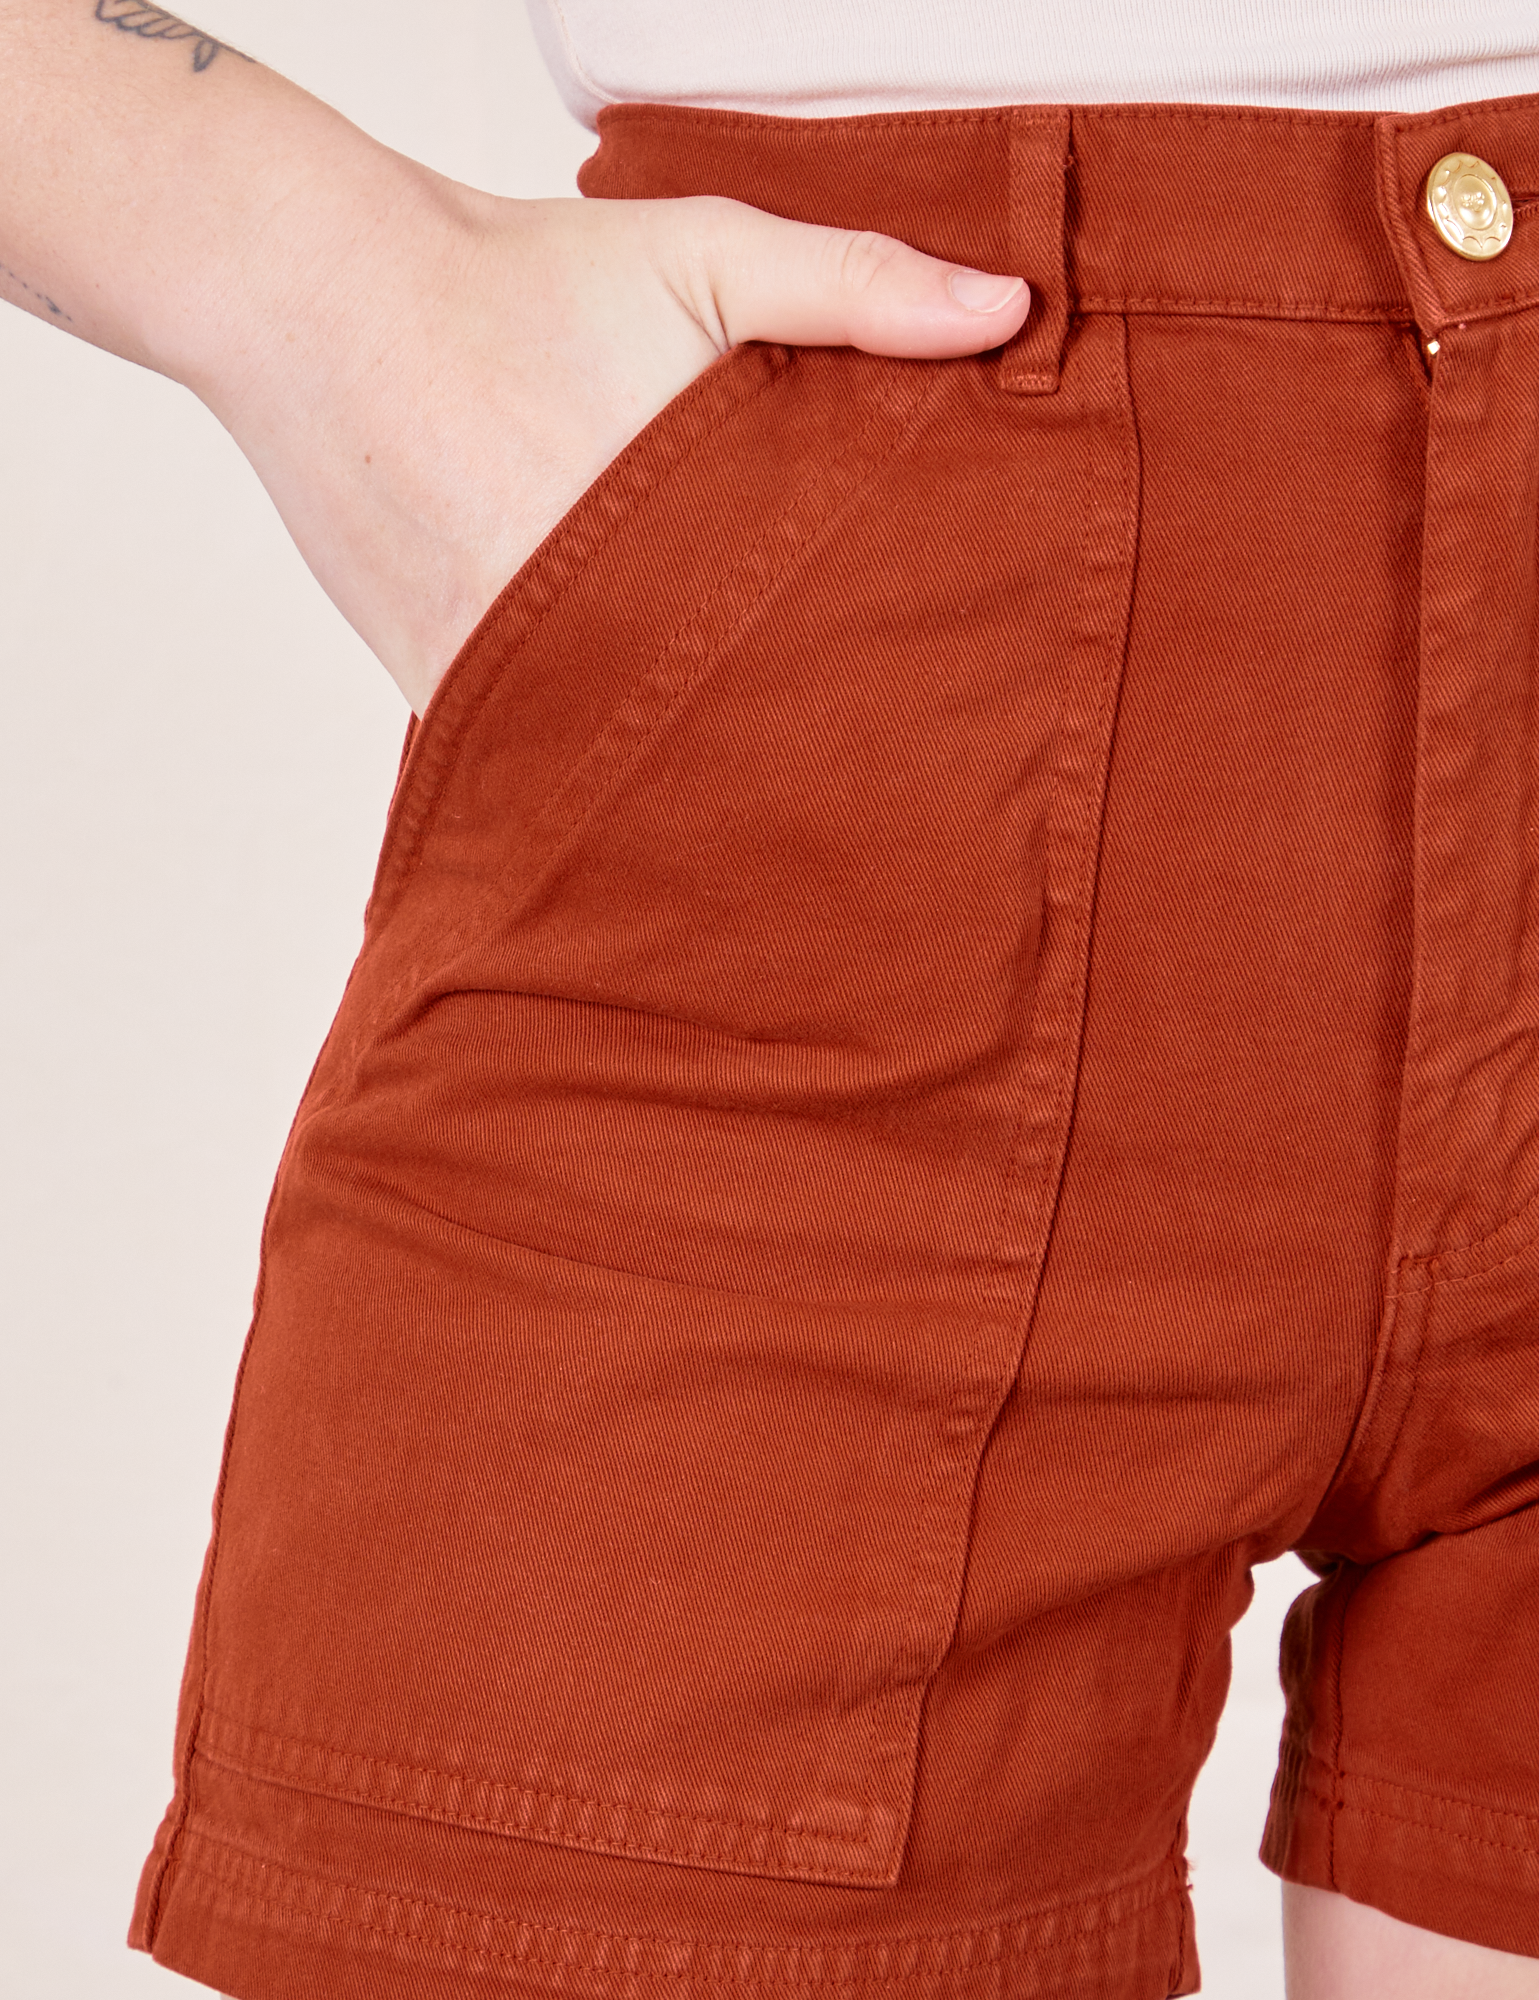 Classic Work Shorts in Paprika front pocket close up. Alex has her hand in the pocket.